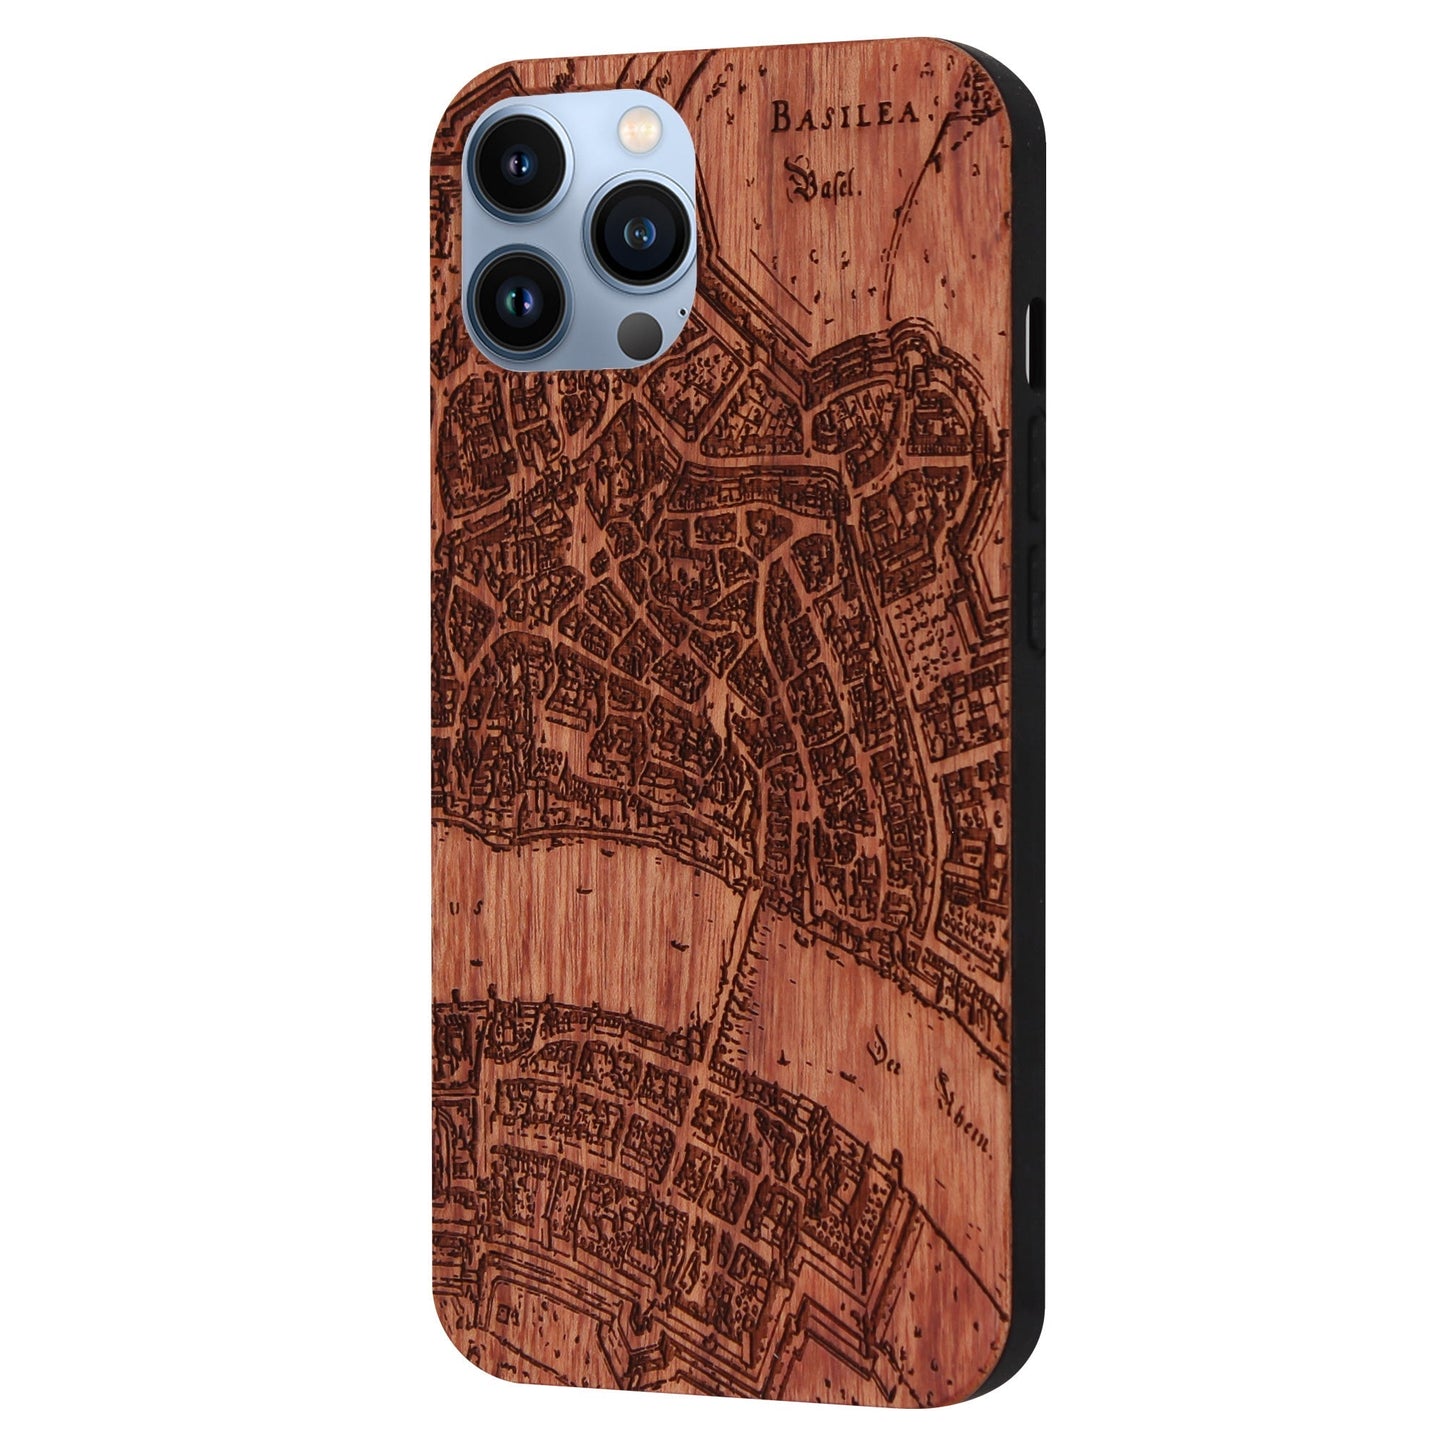 Basel Merian Eden Rosewood Case for iPhone 13 Pro Max